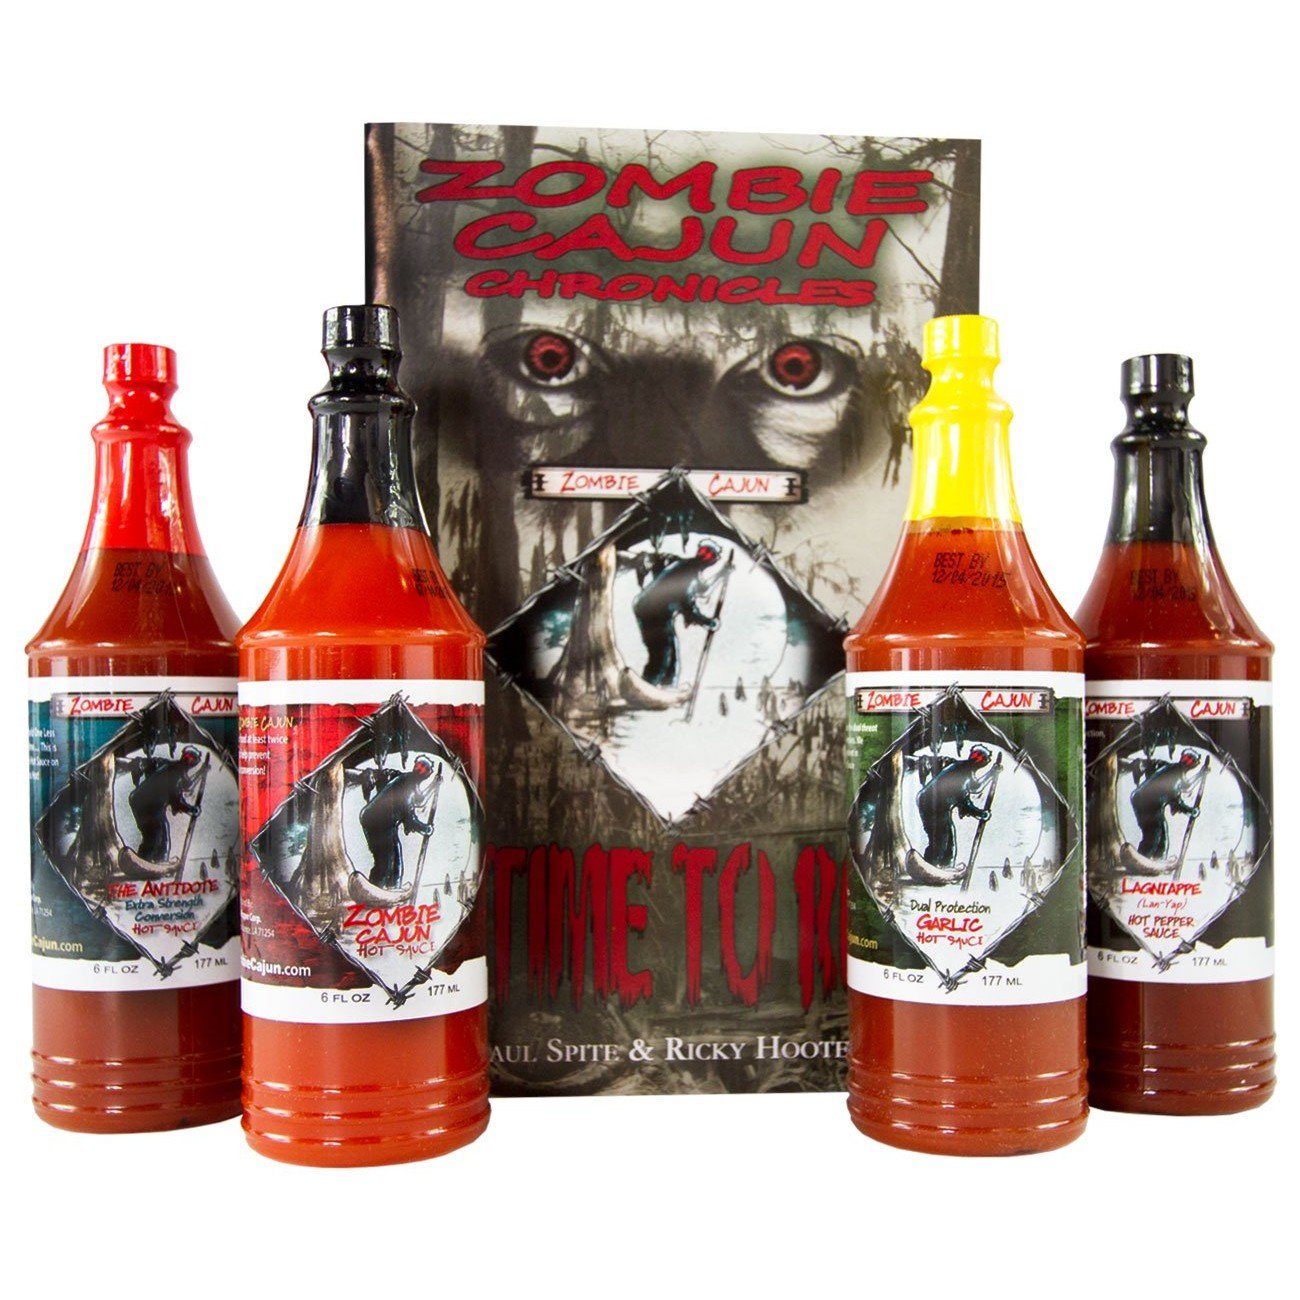 Zombie+Cajun+The+Antidote+Hot+Sauce+Bottle+of+Louisiana+Spice+Cayenne+and+ Habanero+Pepper+Recipe+6oz for sale online